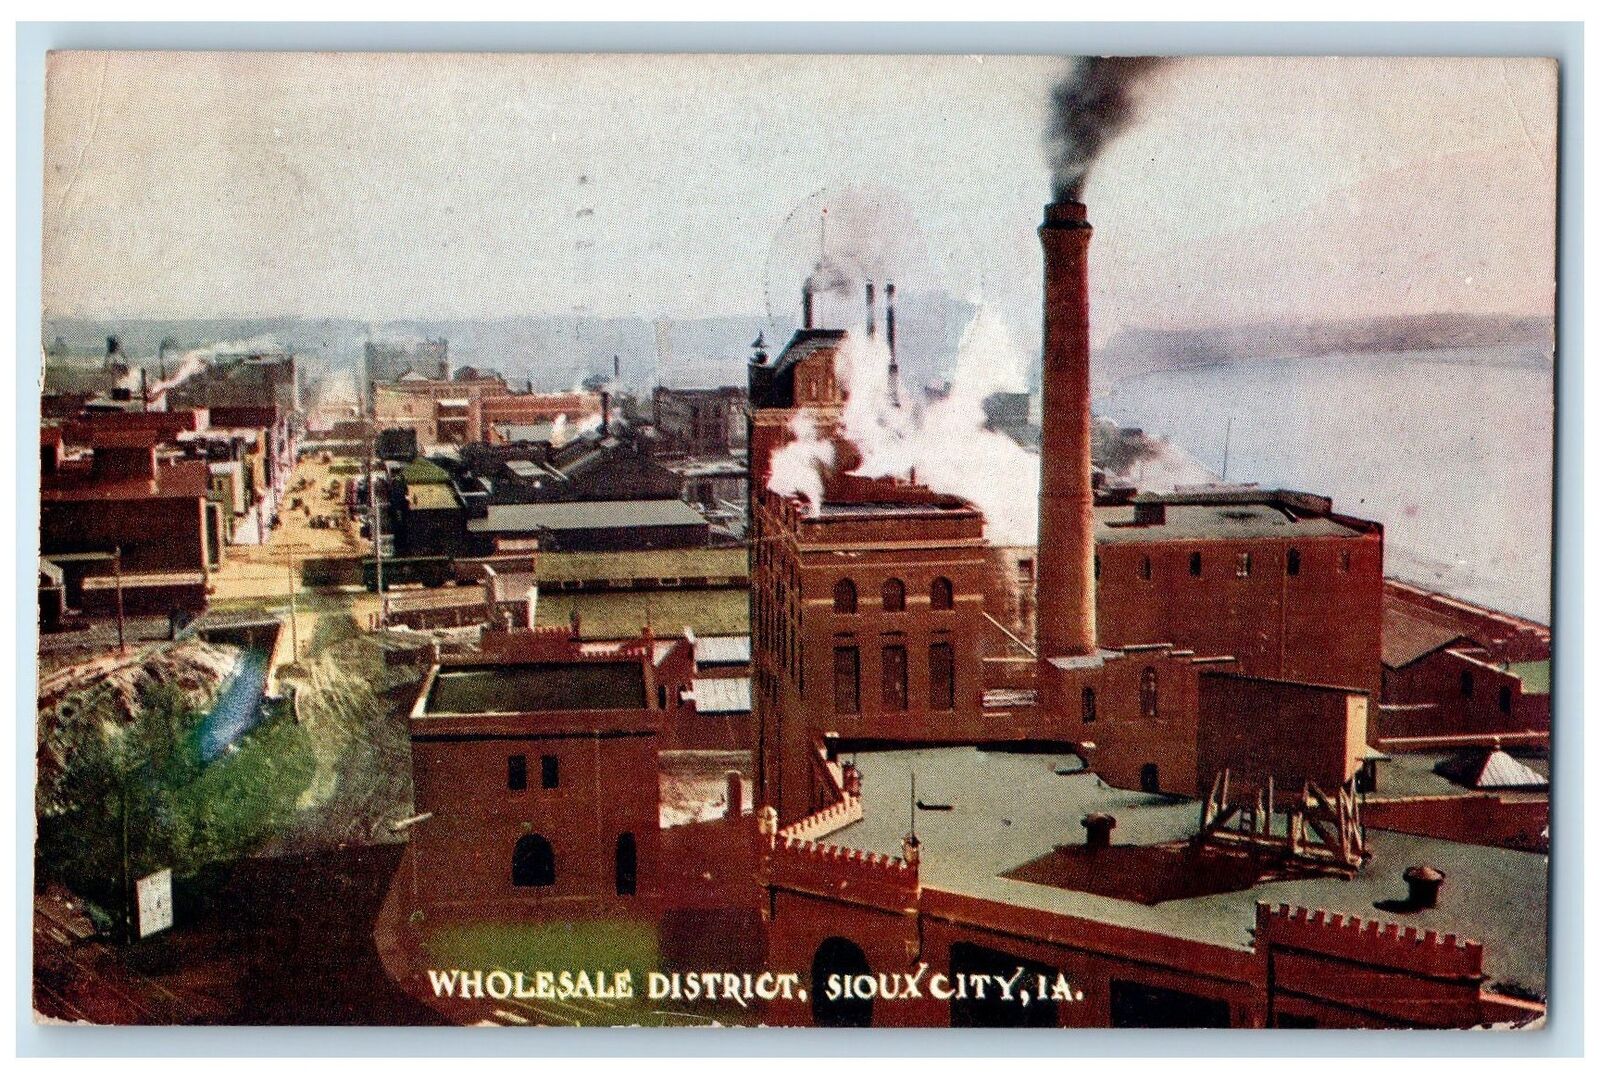 1909 Wholesale District Aerial View Smokestacks Rooftop Sioux City IA Postcard